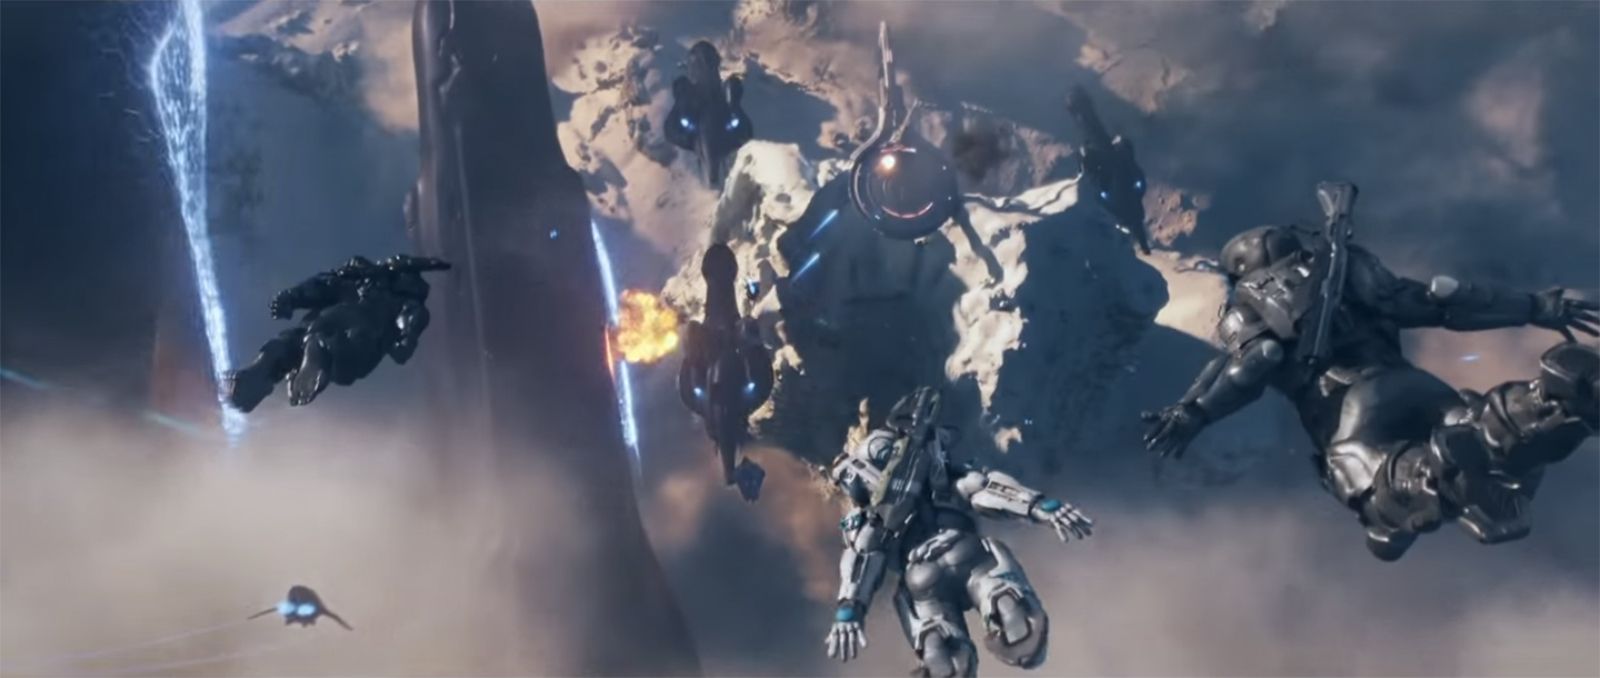 watch blood pumping halo 5 guardians opening cinematic sequence now image 1